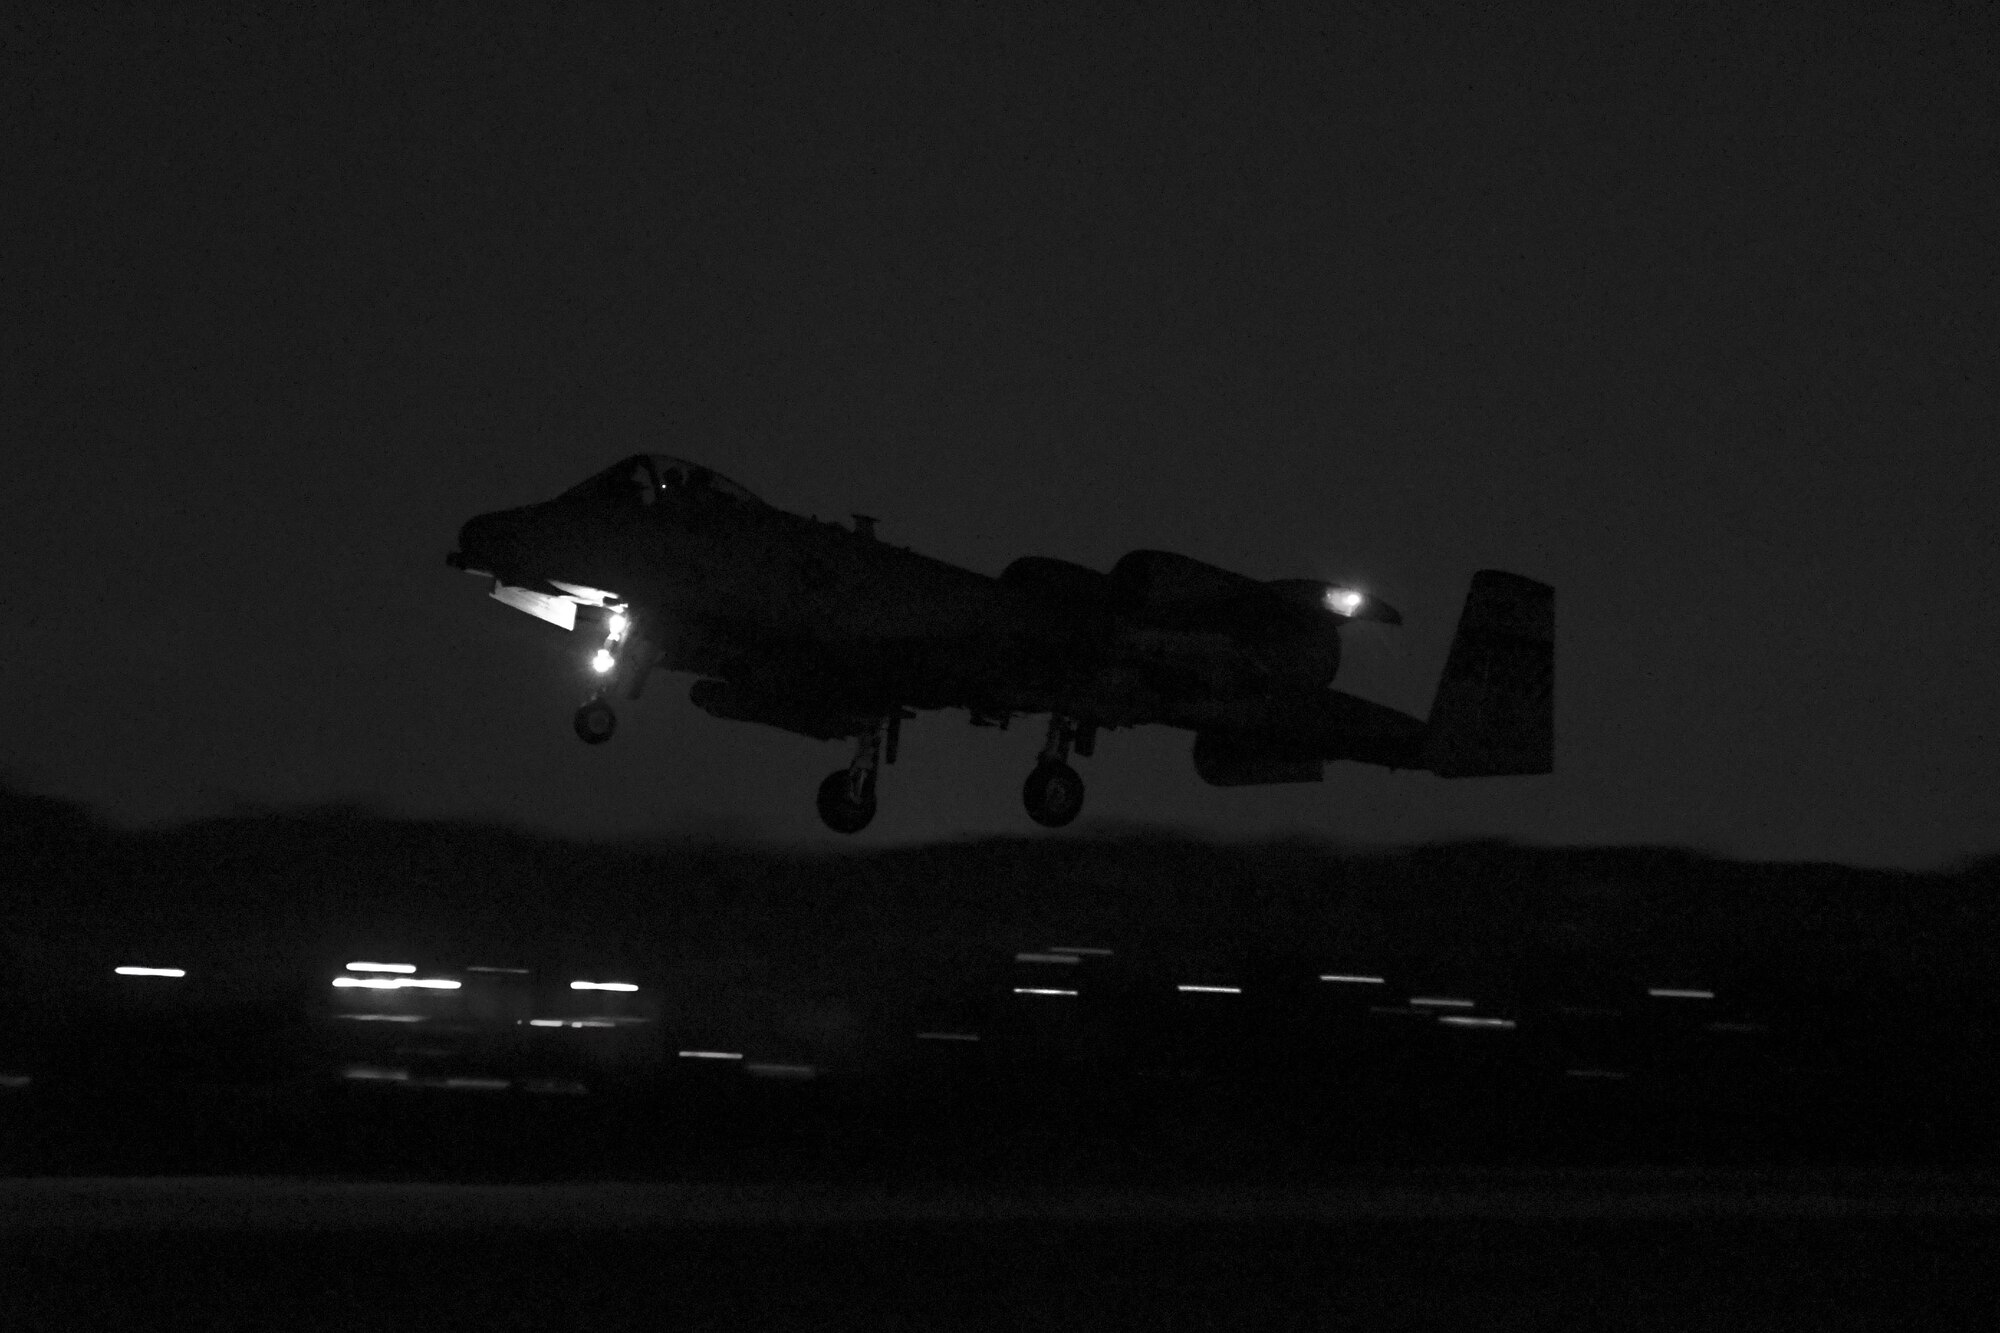 An A-10 Thunderbolt II assigned to the 25th Fighter Squadron takes off for a training mission at Osan Air Base, Republic of Korea, Jan. 25, 2017. Several A-10s were flown in the mission, which was part of Exercise Pacific Thunder 17-1 and also the first night mission in the history of the exercise. (U.S. Air Force photo illustration by Senior Airman Victor J. Caputo)